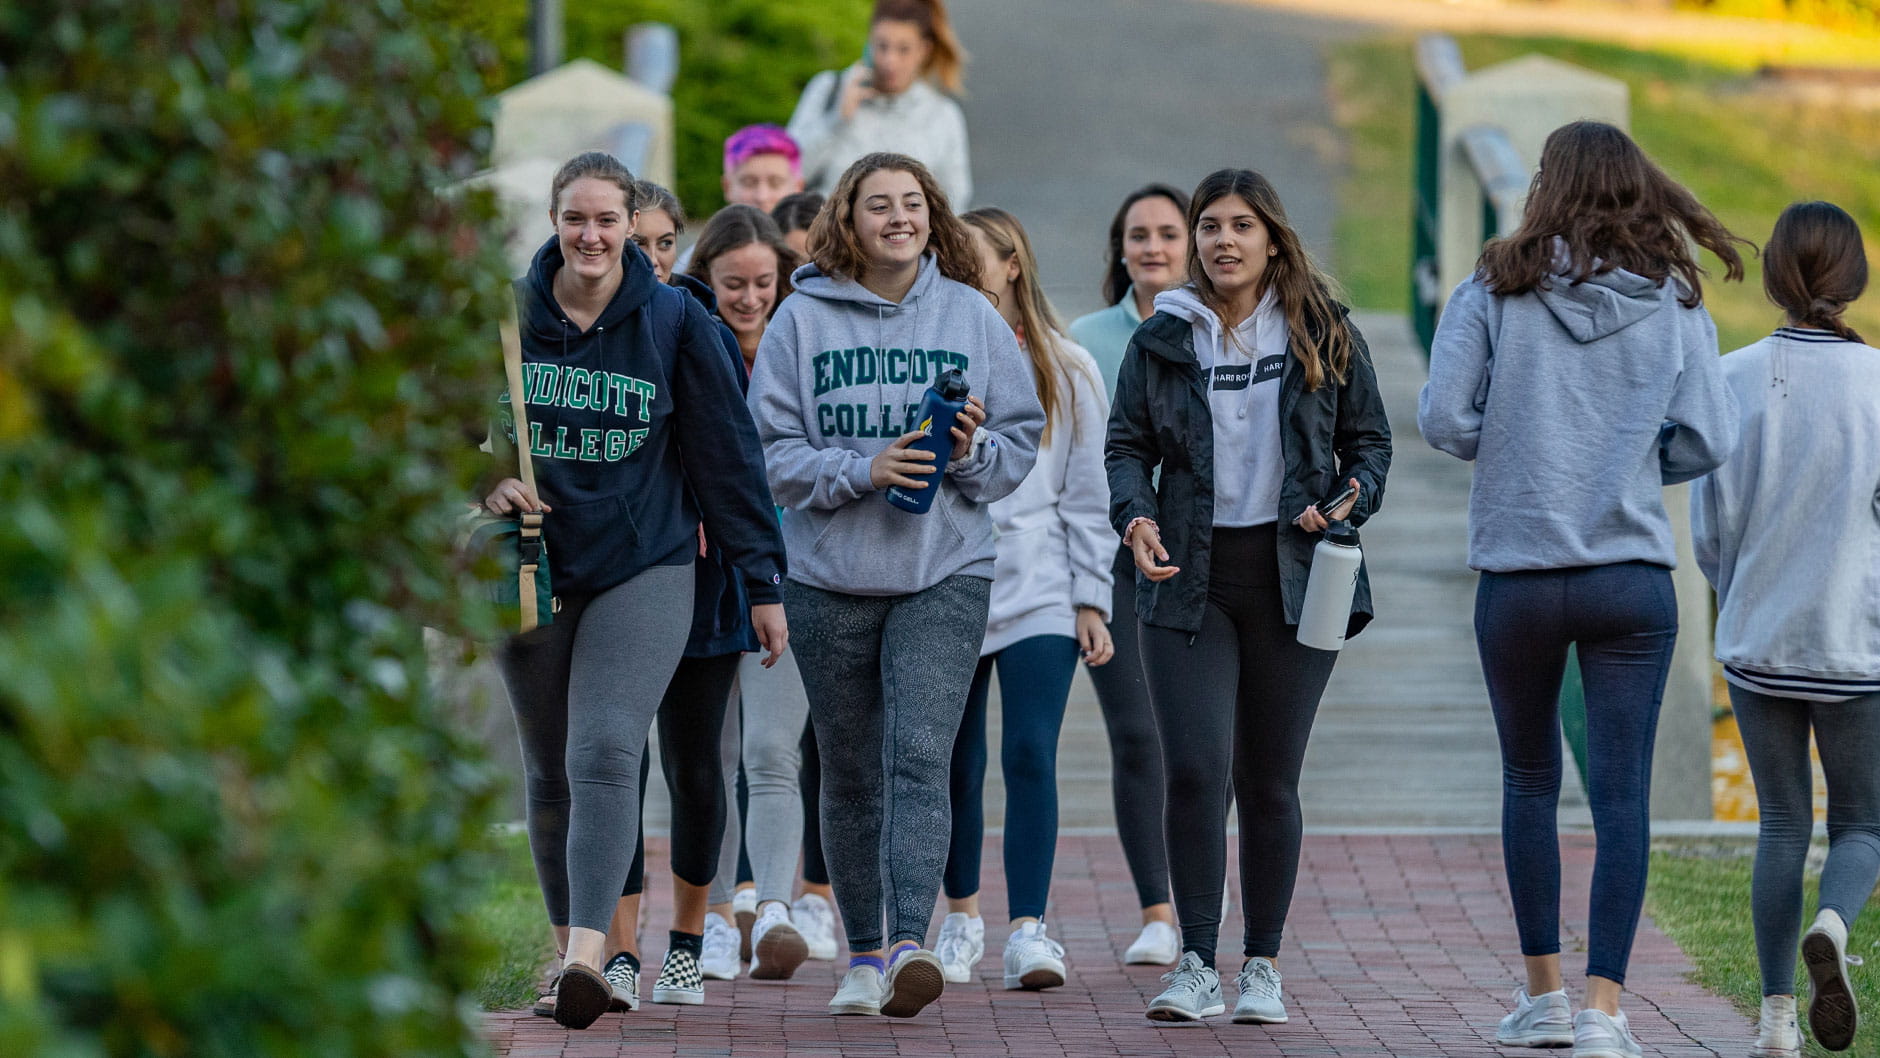 Students walking on the Endicott College campus